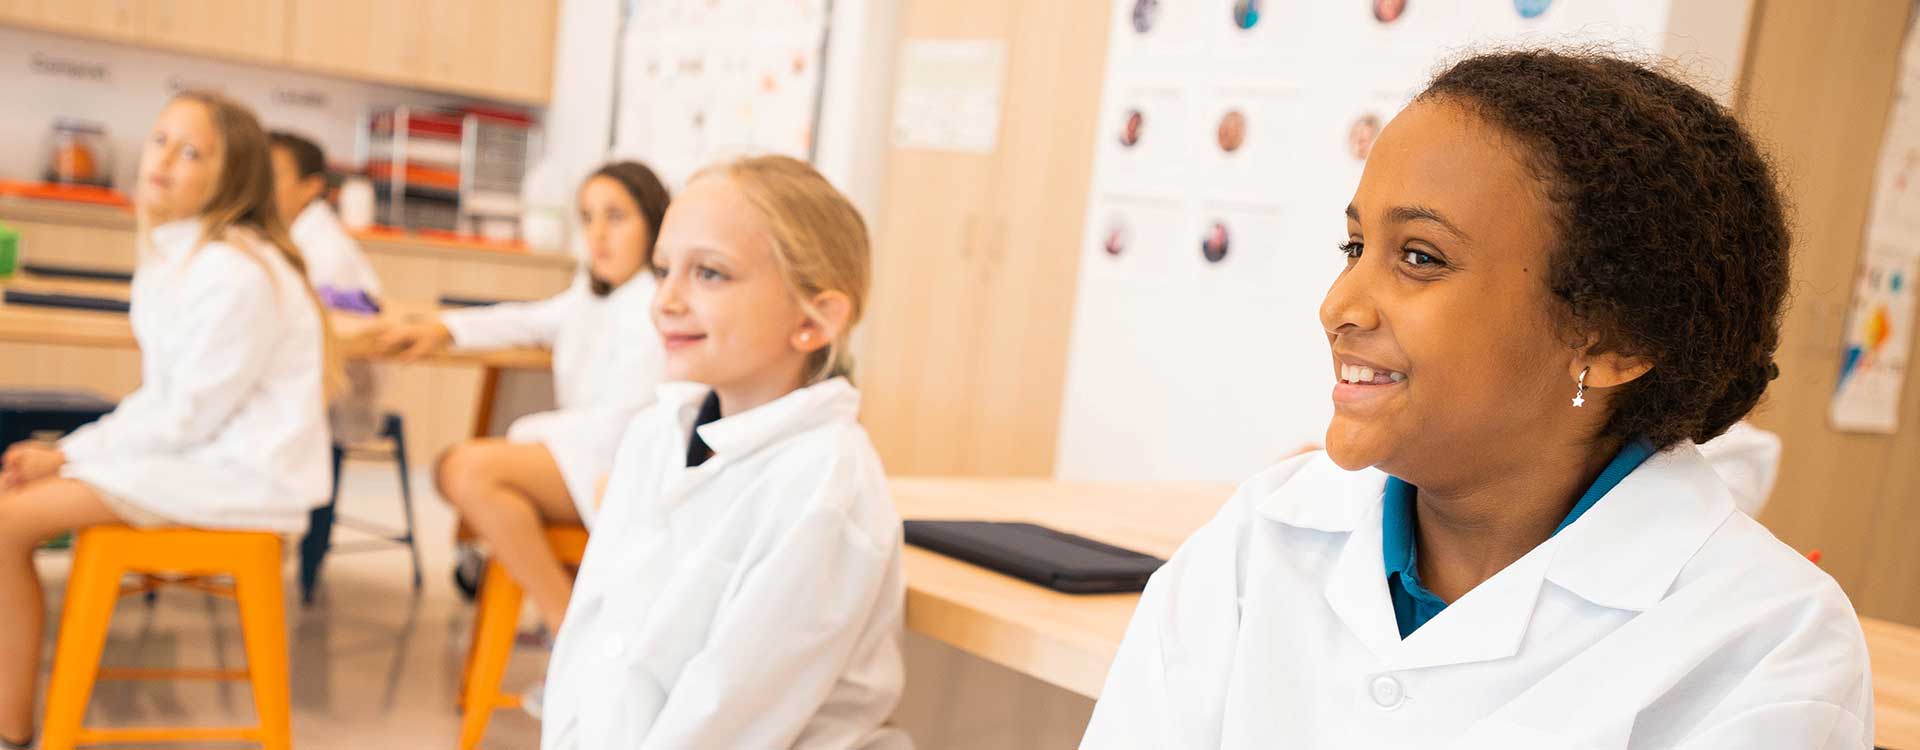 Children in labcoats for science class